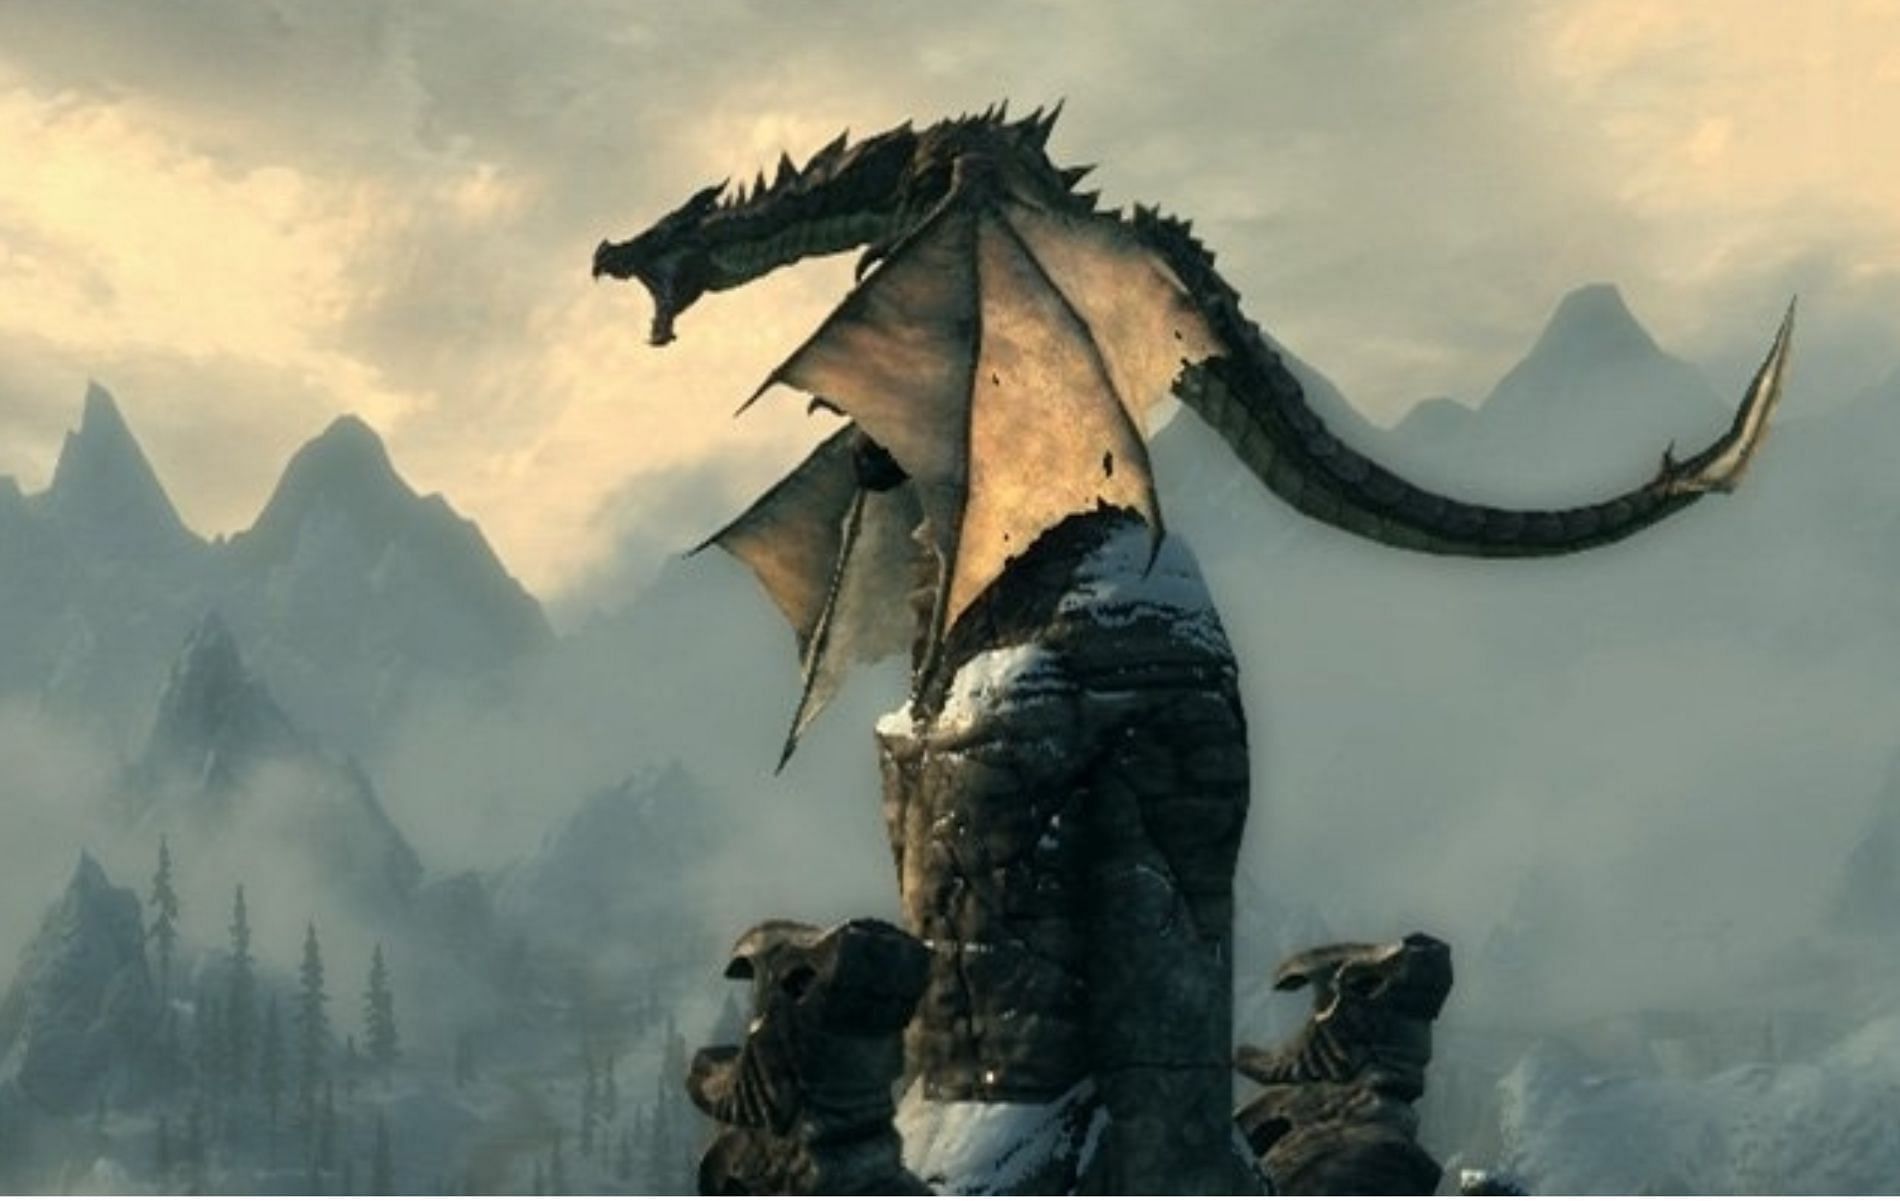 Want bigger and more ferocious dragons in Skyrim? Check out the list of dragon mods below (Image via Bethesda Game Studios)